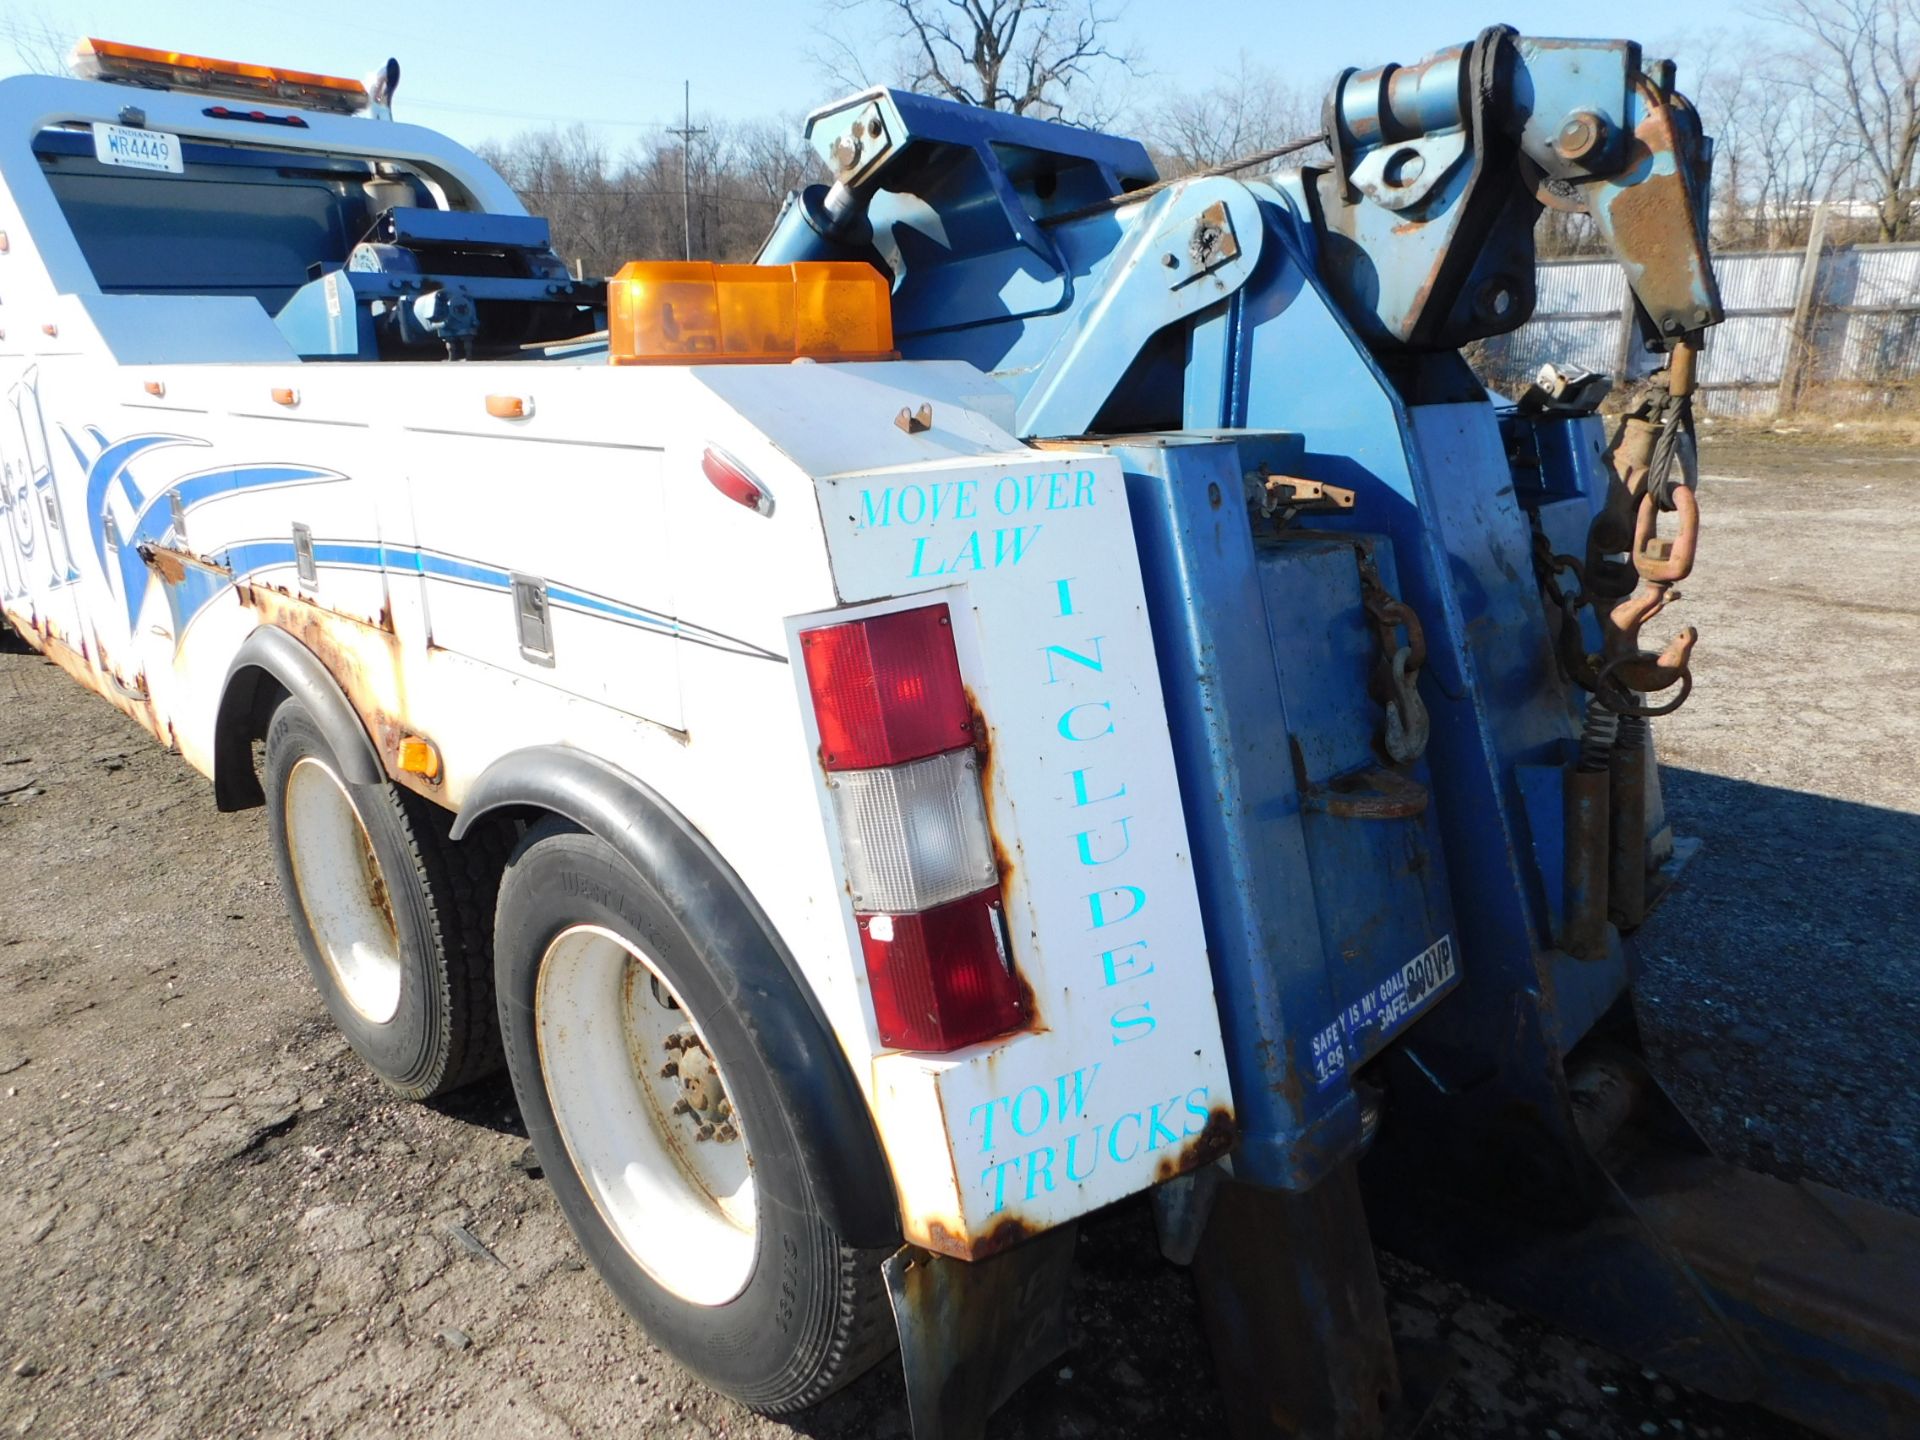 1989 WHITE Volvo GMC Aero Series 60 Heavy Duty Tow Truck, 329,000 miles showing on Odometer, Detroit - Image 10 of 28